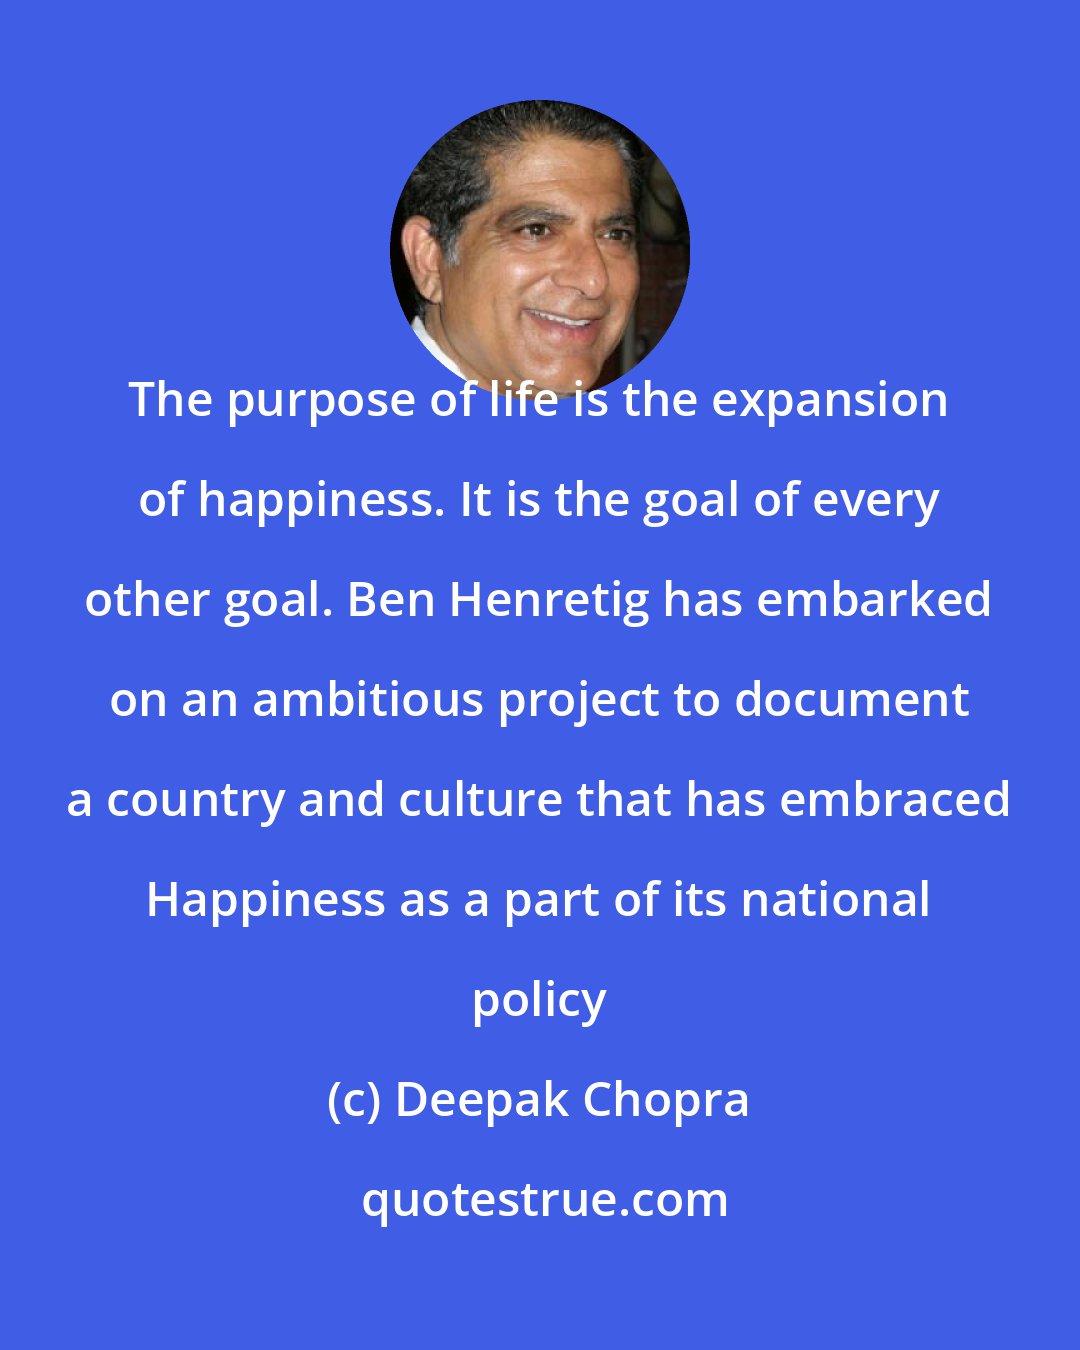 Deepak Chopra: The purpose of life is the expansion of happiness. It is the goal of every other goal. Ben Henretig has embarked on an ambitious project to document a country and culture that has embraced Happiness as a part of its national policy